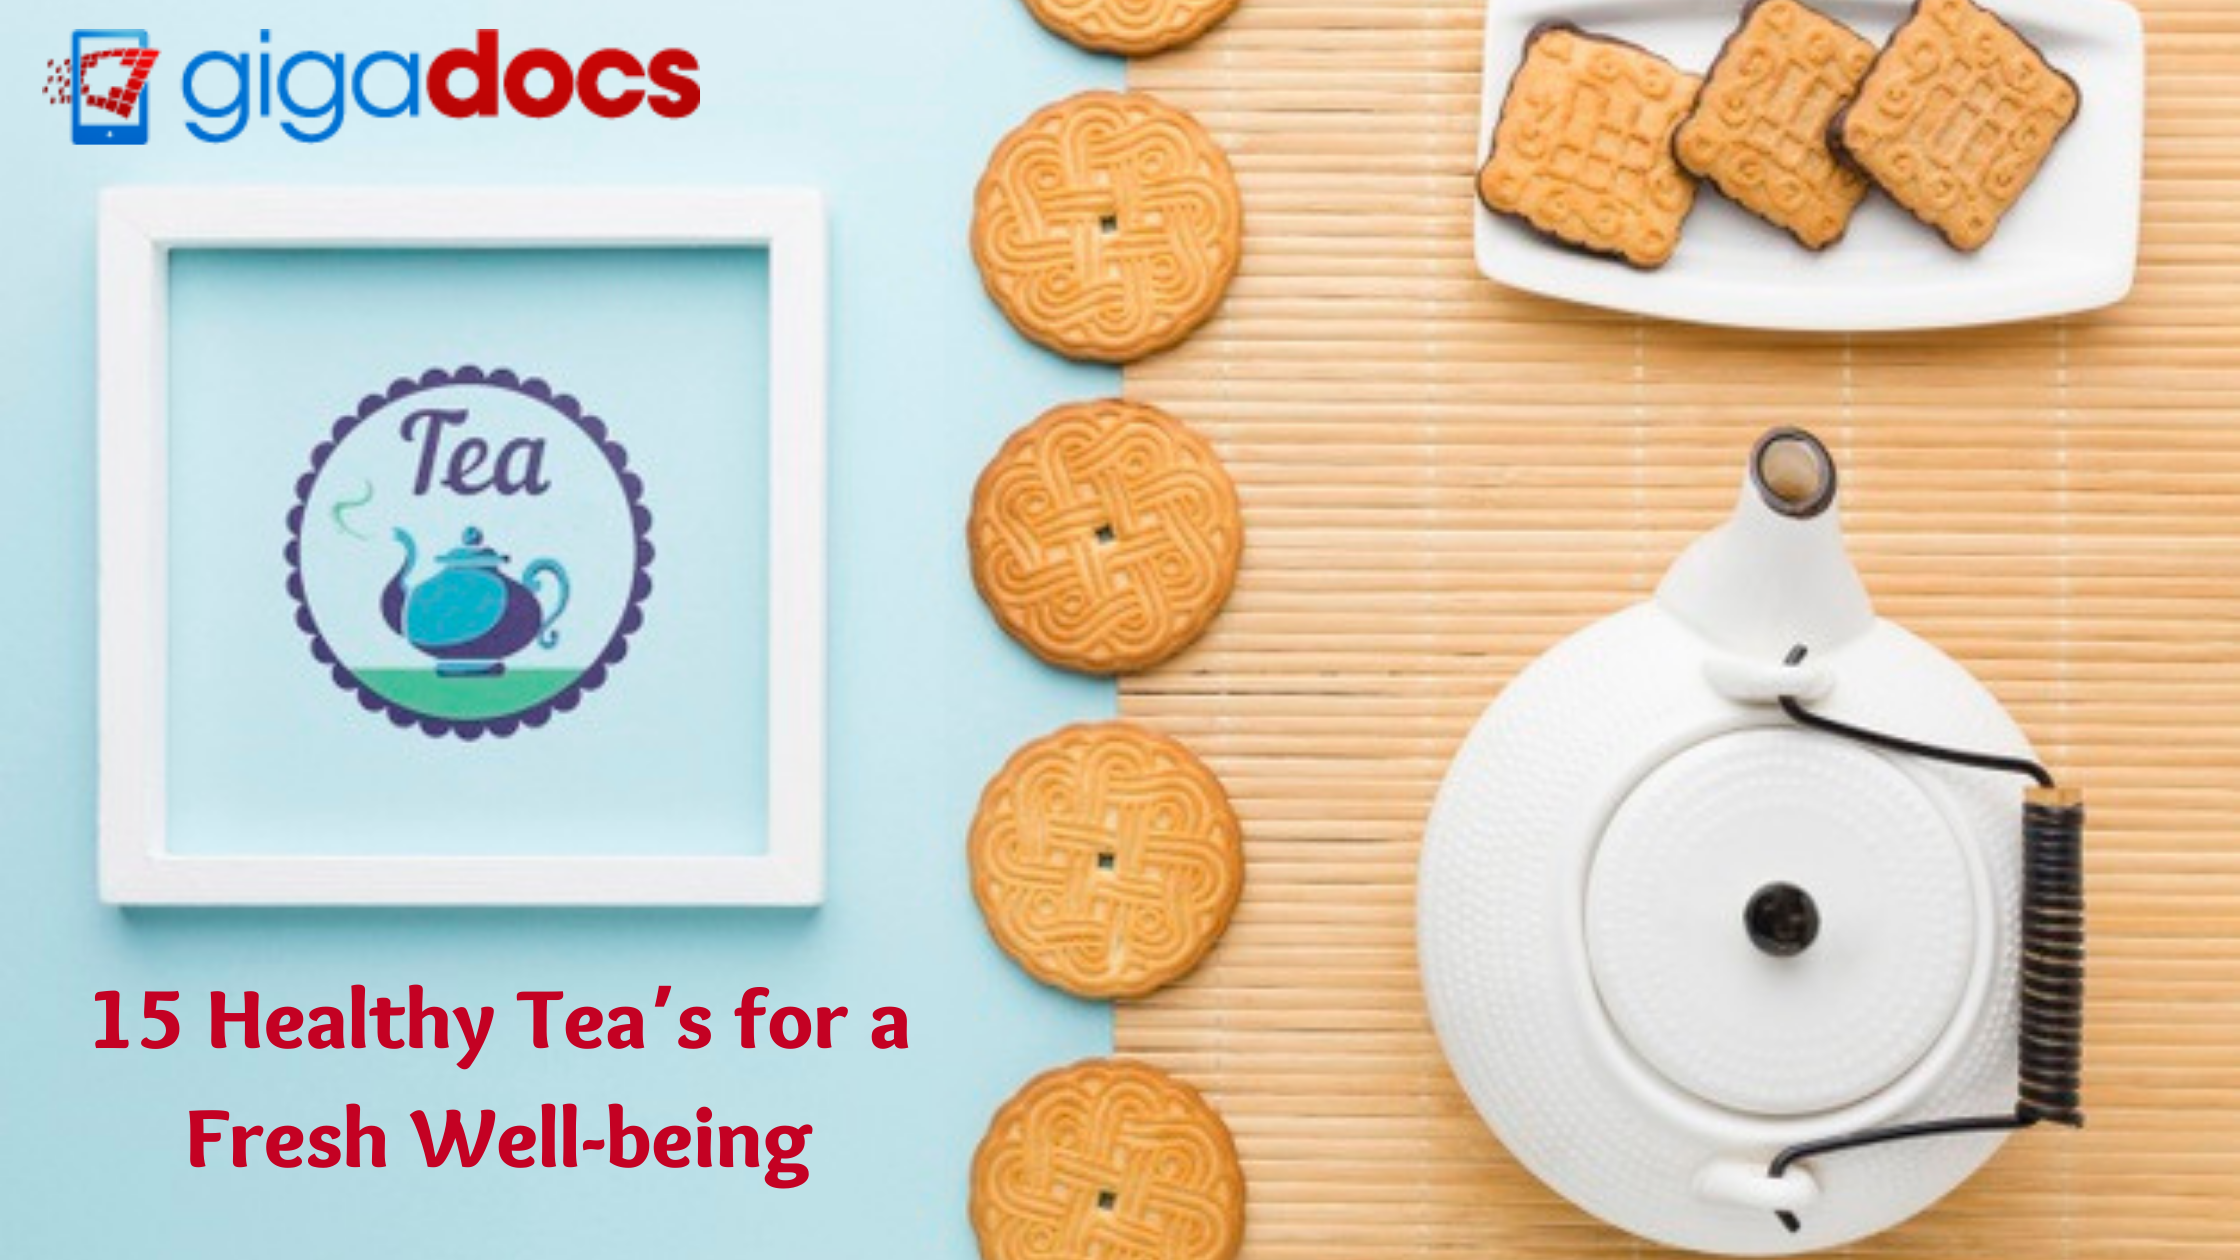 International Tea Day: 15 Teas that Relieve Stress and Anxiety